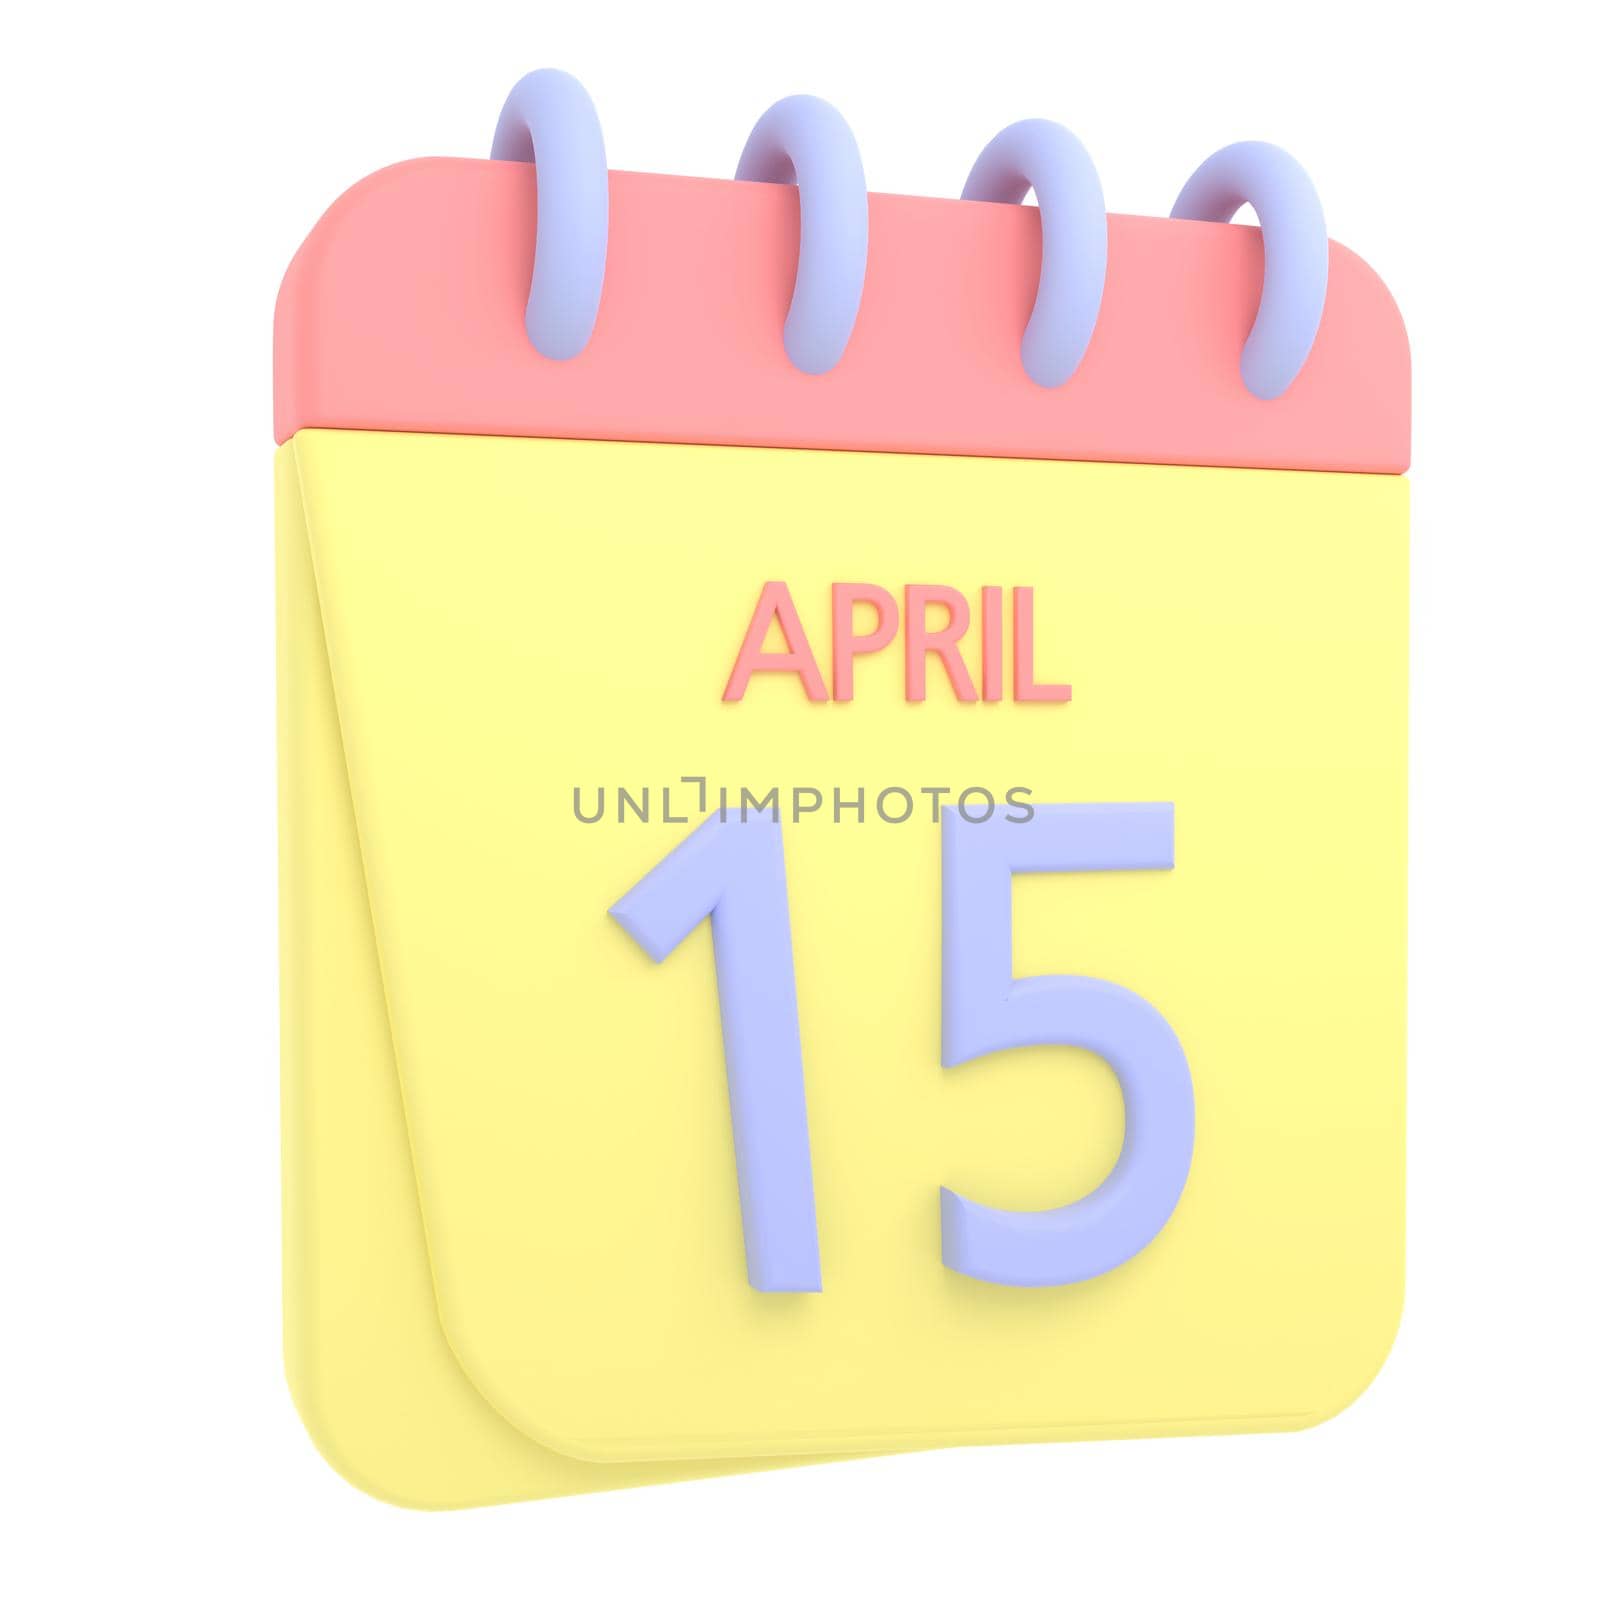 15th April 3D calendar icon. Web style. High resolution image. White background